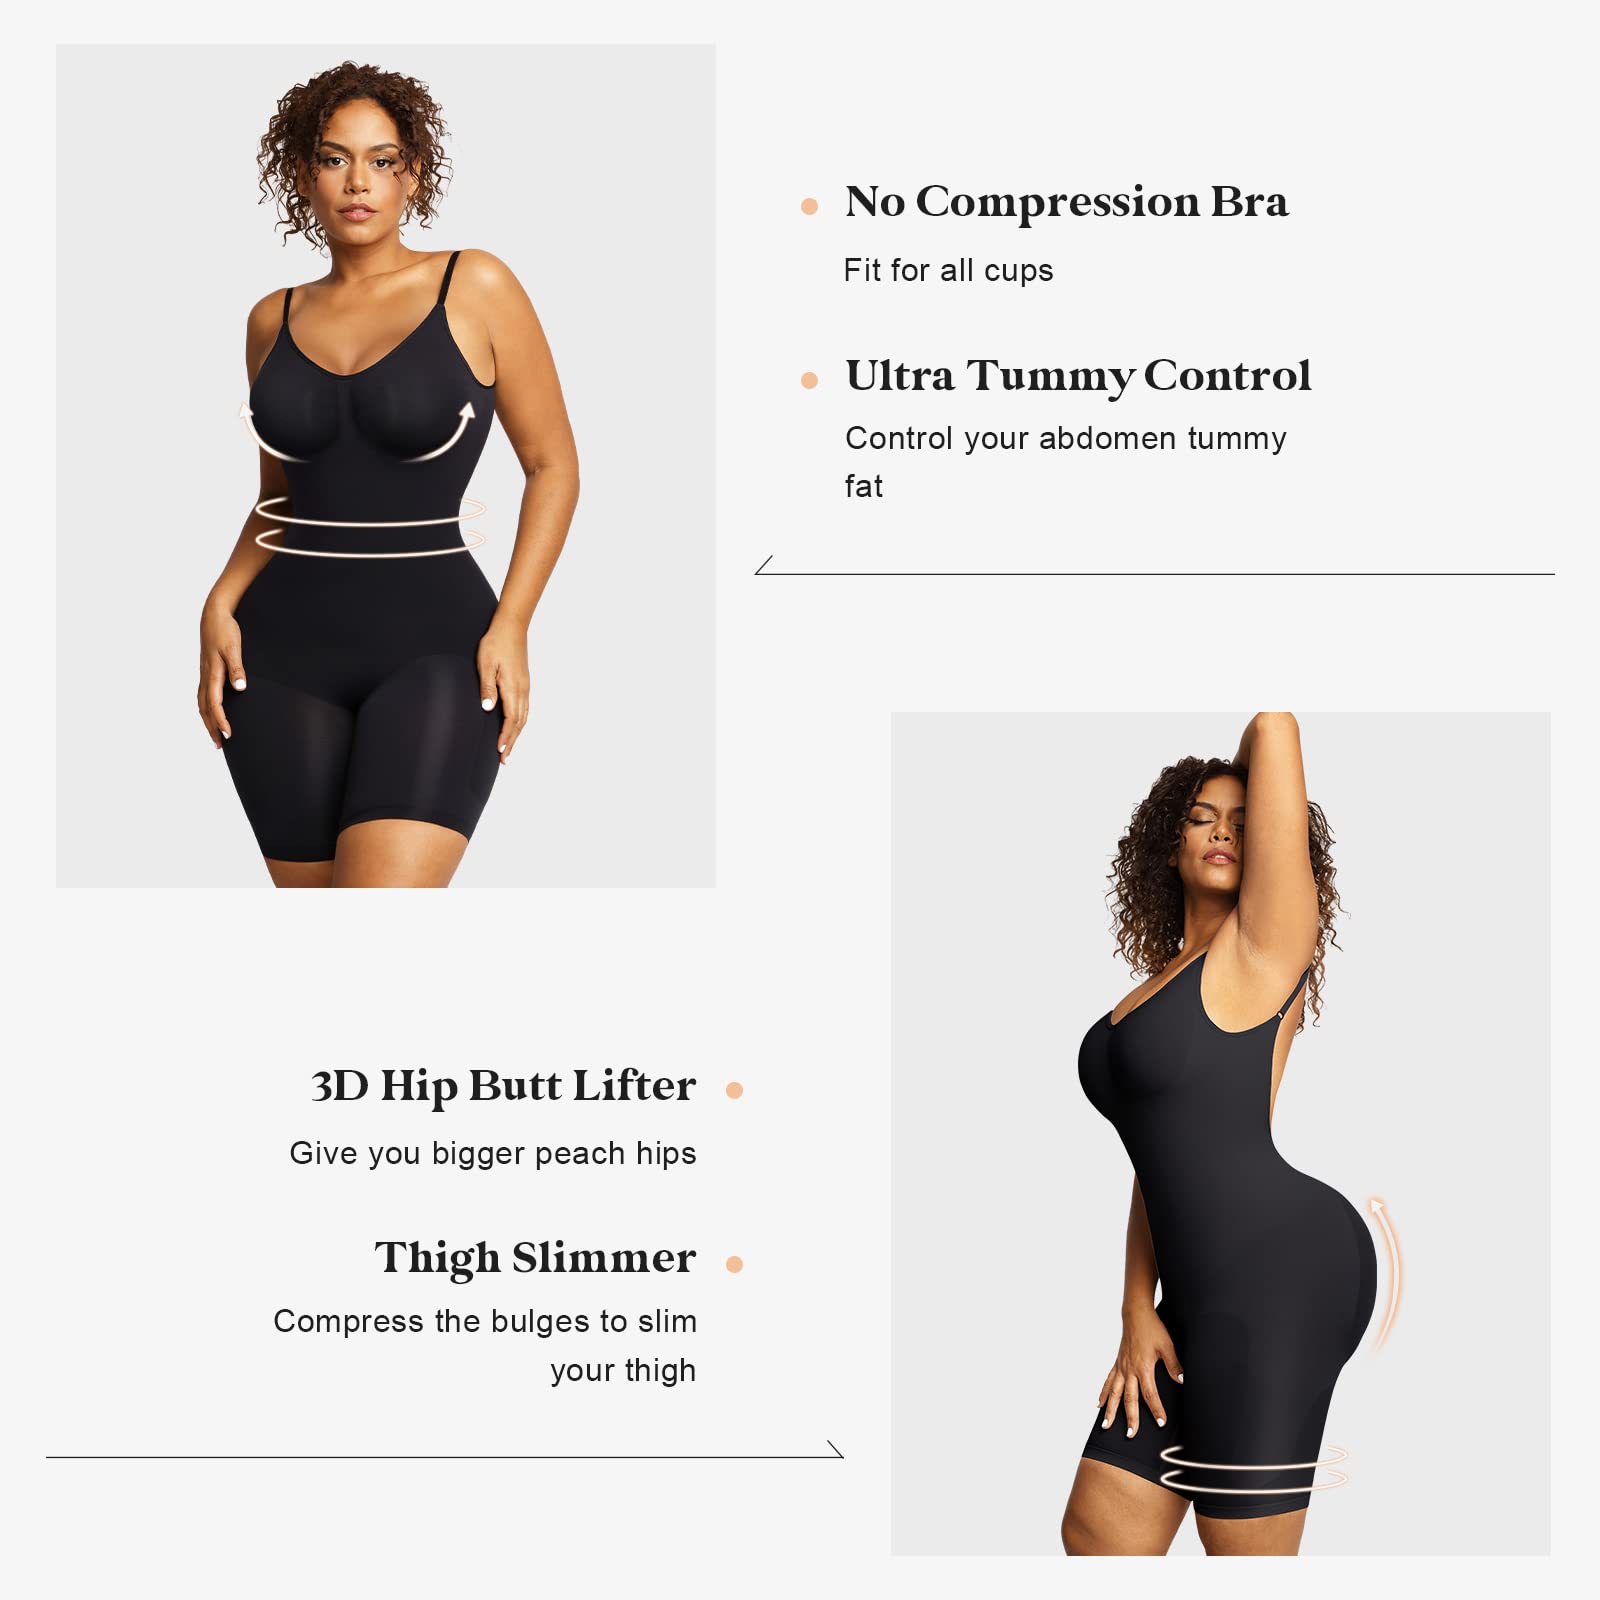 Flaunt Your Low Back Dress with Confidence in Women's Backless Shapewear:  Deep V-Neck Body Shaper Designed Provide Support and Enhance Your Silhouette